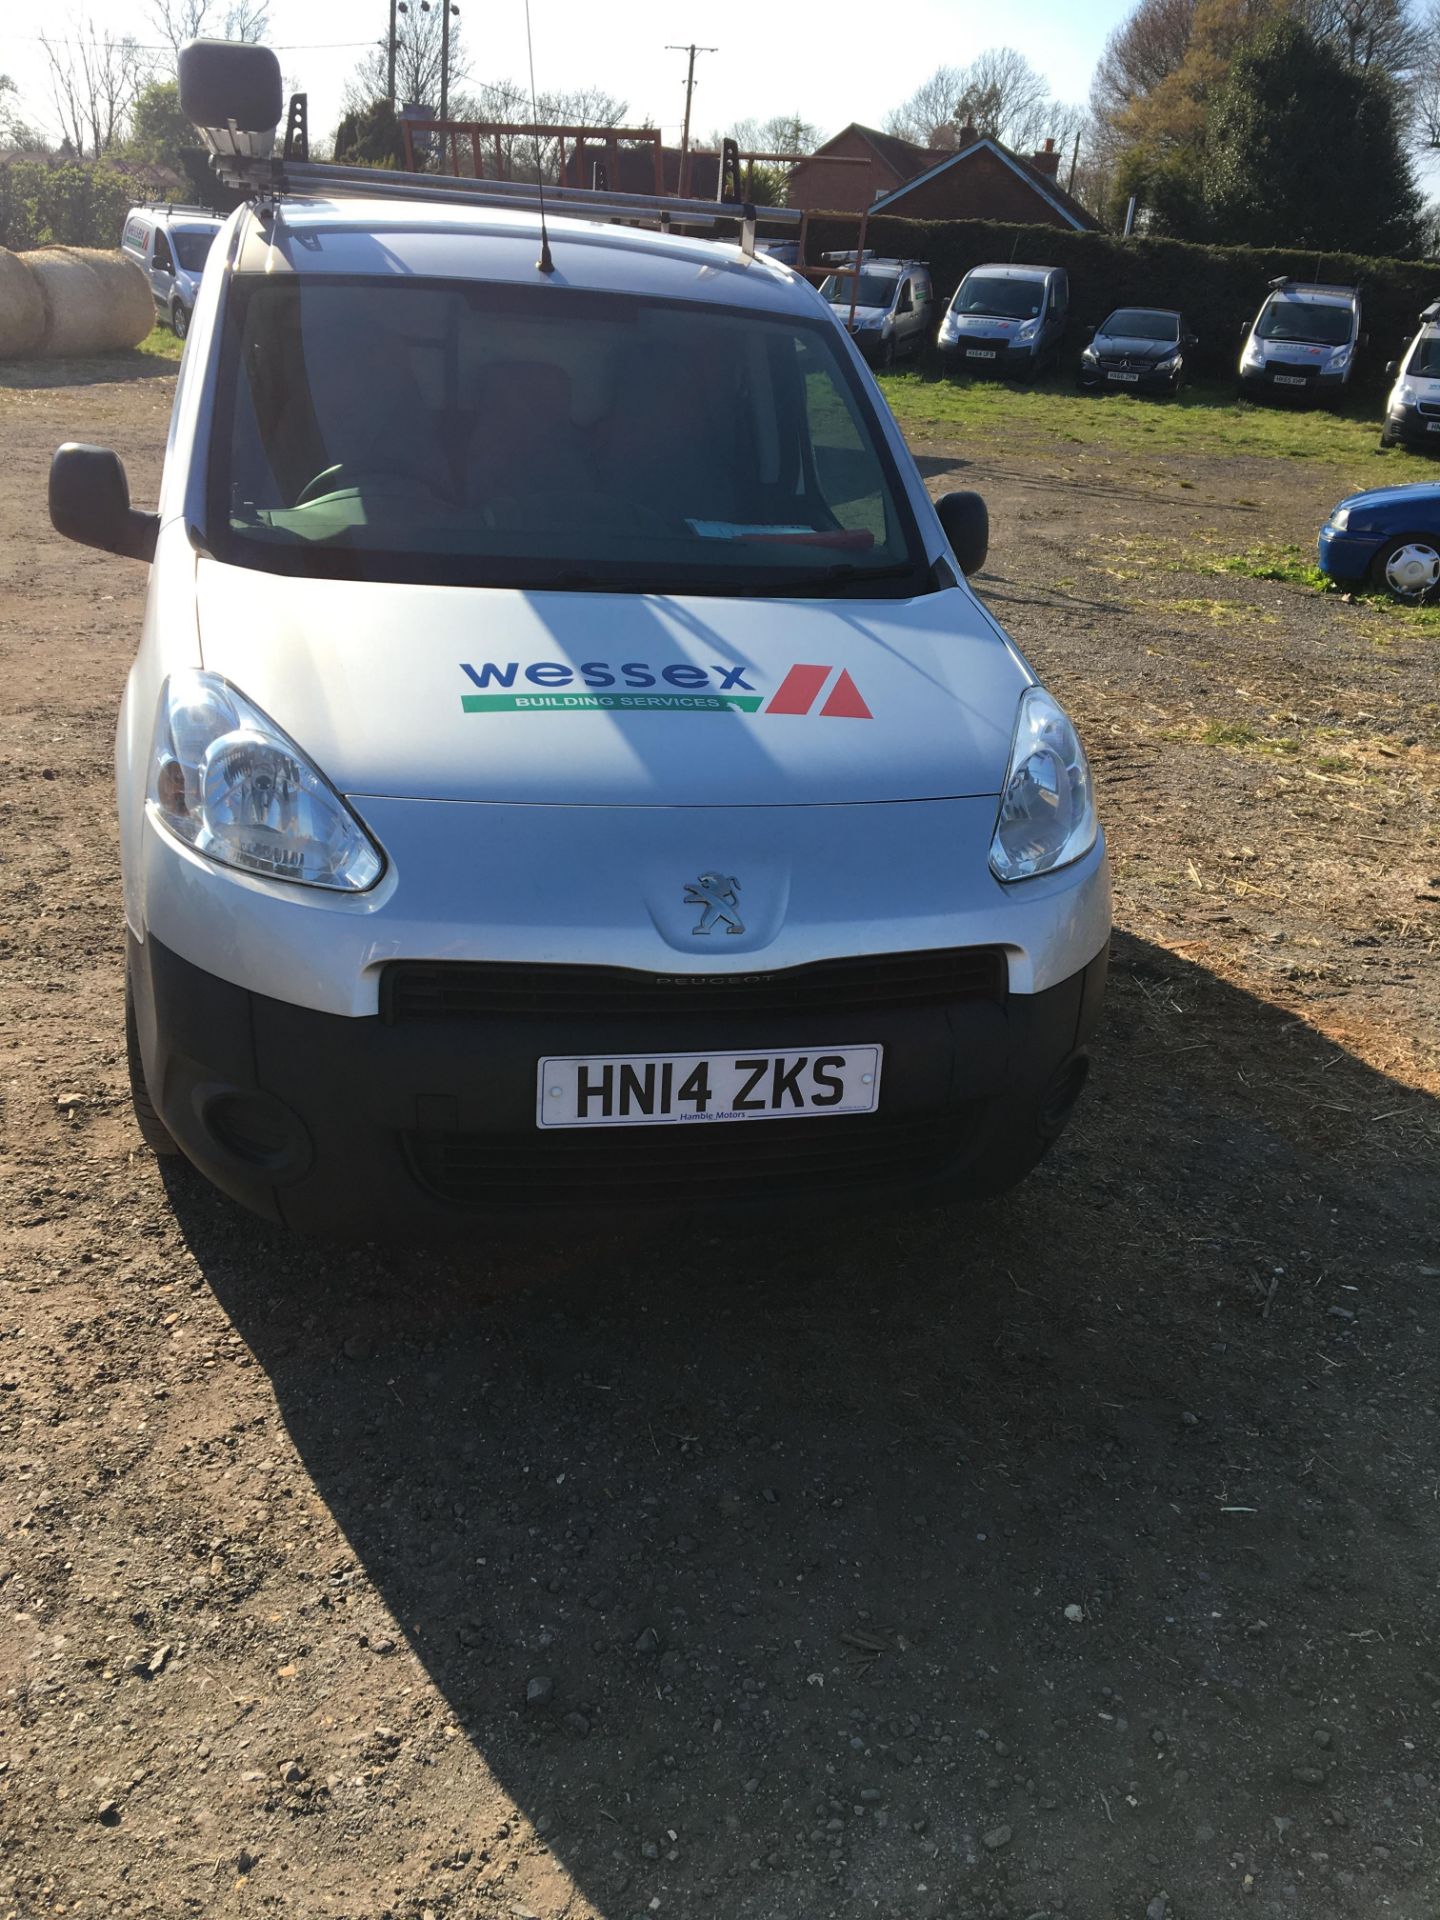 PEUGEOT PARTNER 850 SE L1 E-HDI signwritten panel van, with roof rails and tube box, Registration No